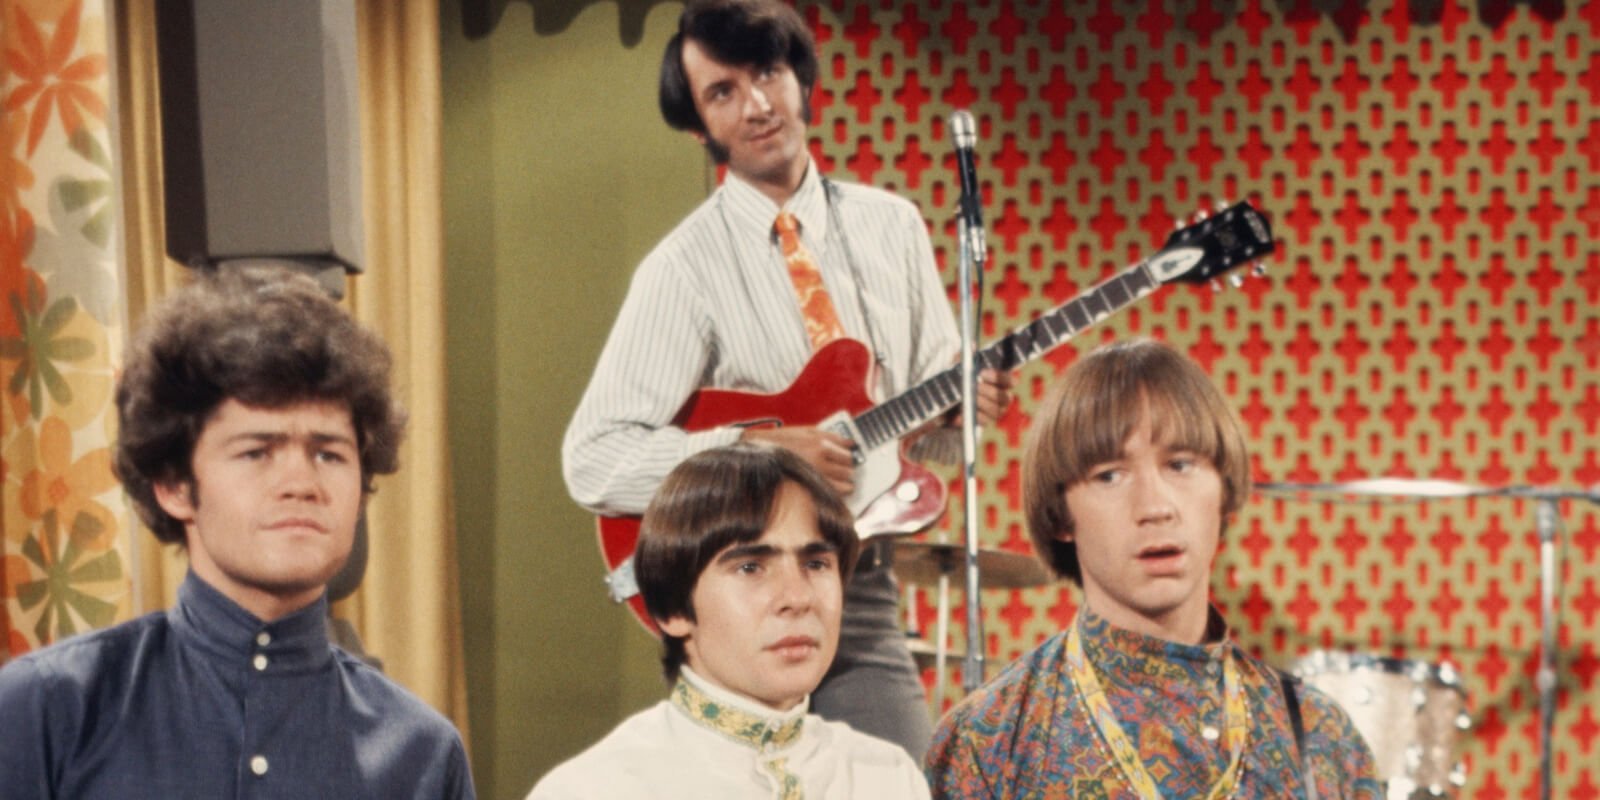 Micky Dolenz, Davy Jones, Mike Nesmith, and Peter Tork on the set of 'The Monkees.'